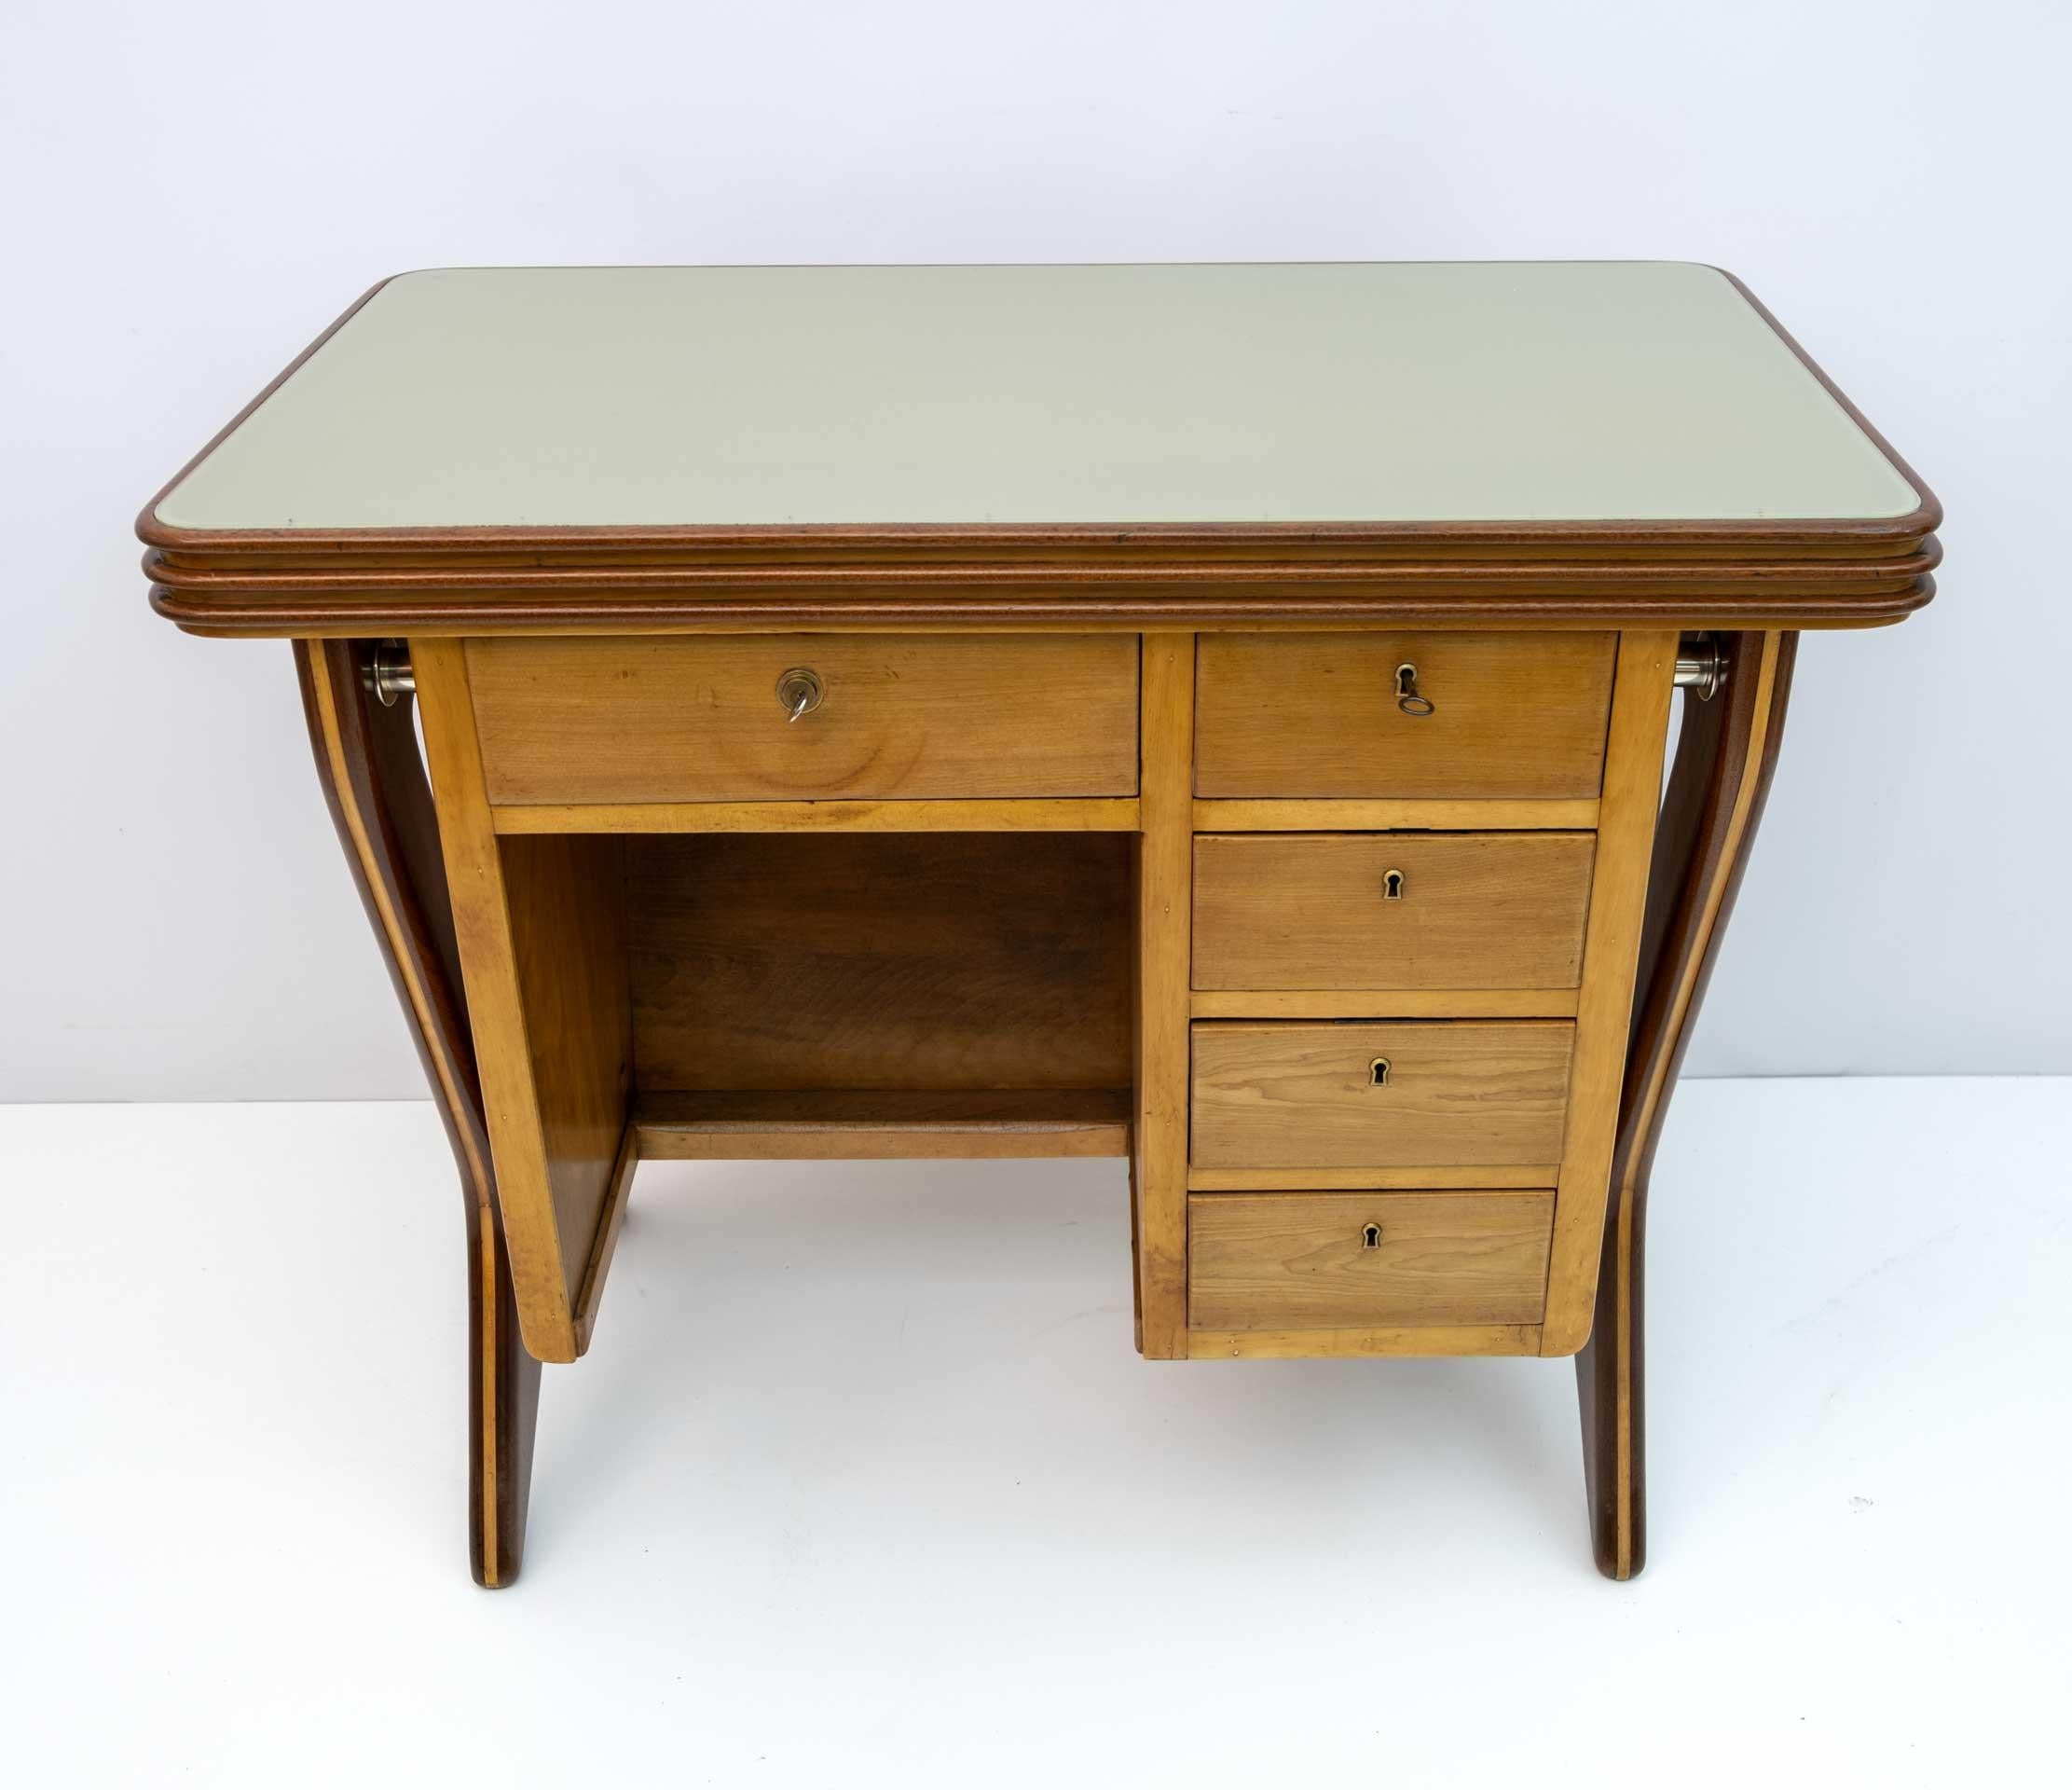 Beautiful and original shop cash desk designed by Osvaldo Borsani in the 1950s, original VITREX glass top.
Note the particularity of the designer and the various woods used. Fully restored and polished with shellac.